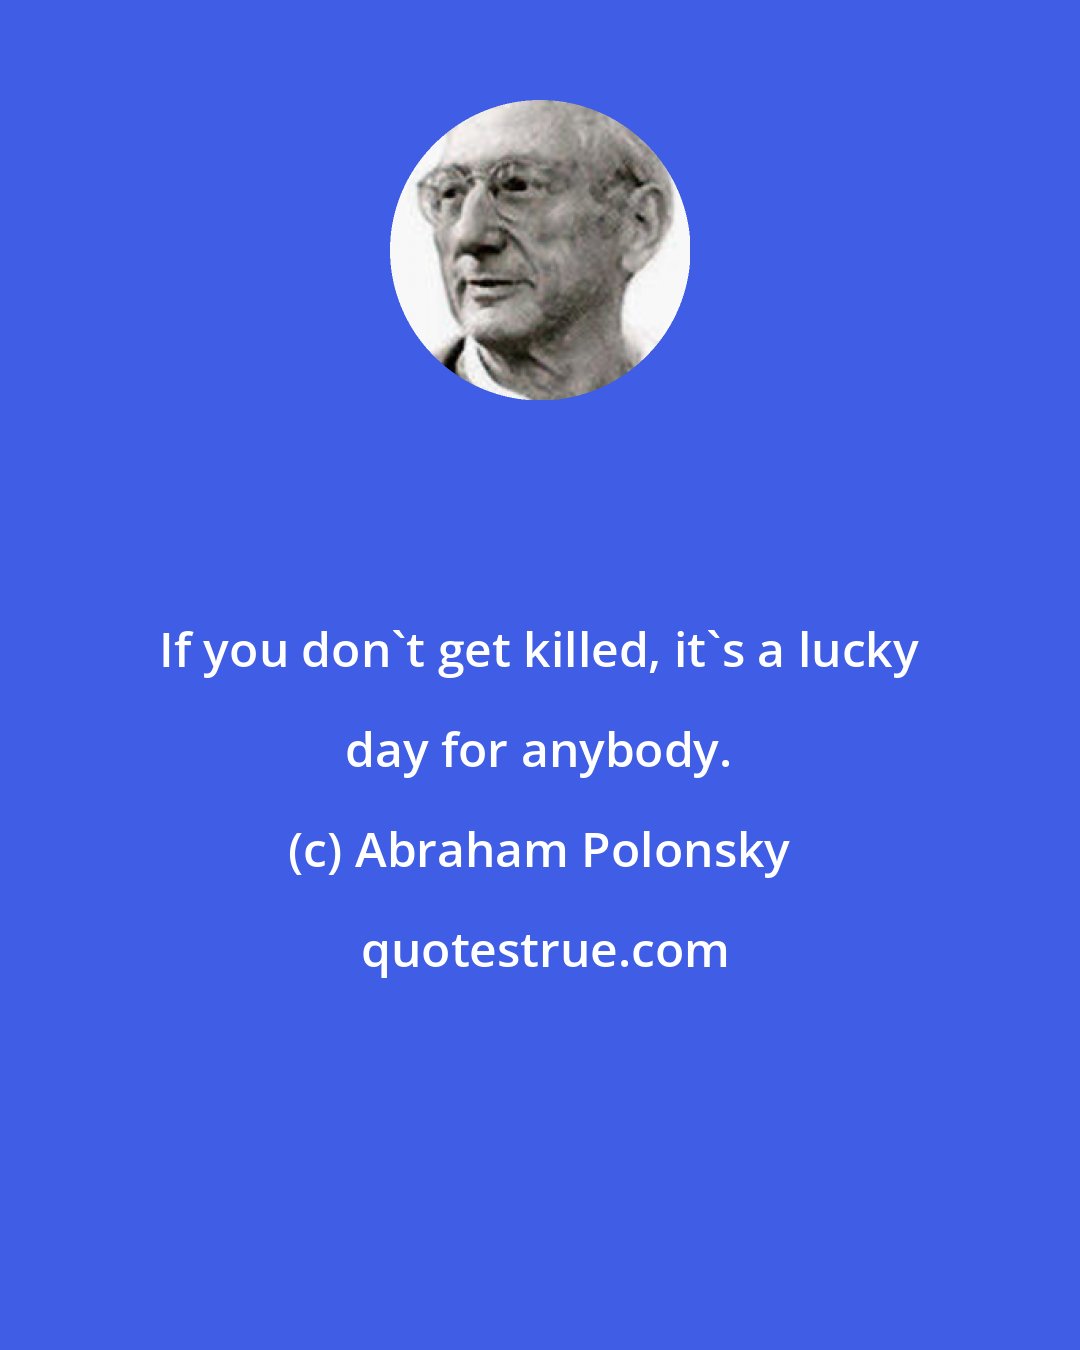 Abraham Polonsky: If you don't get killed, it's a lucky day for anybody.